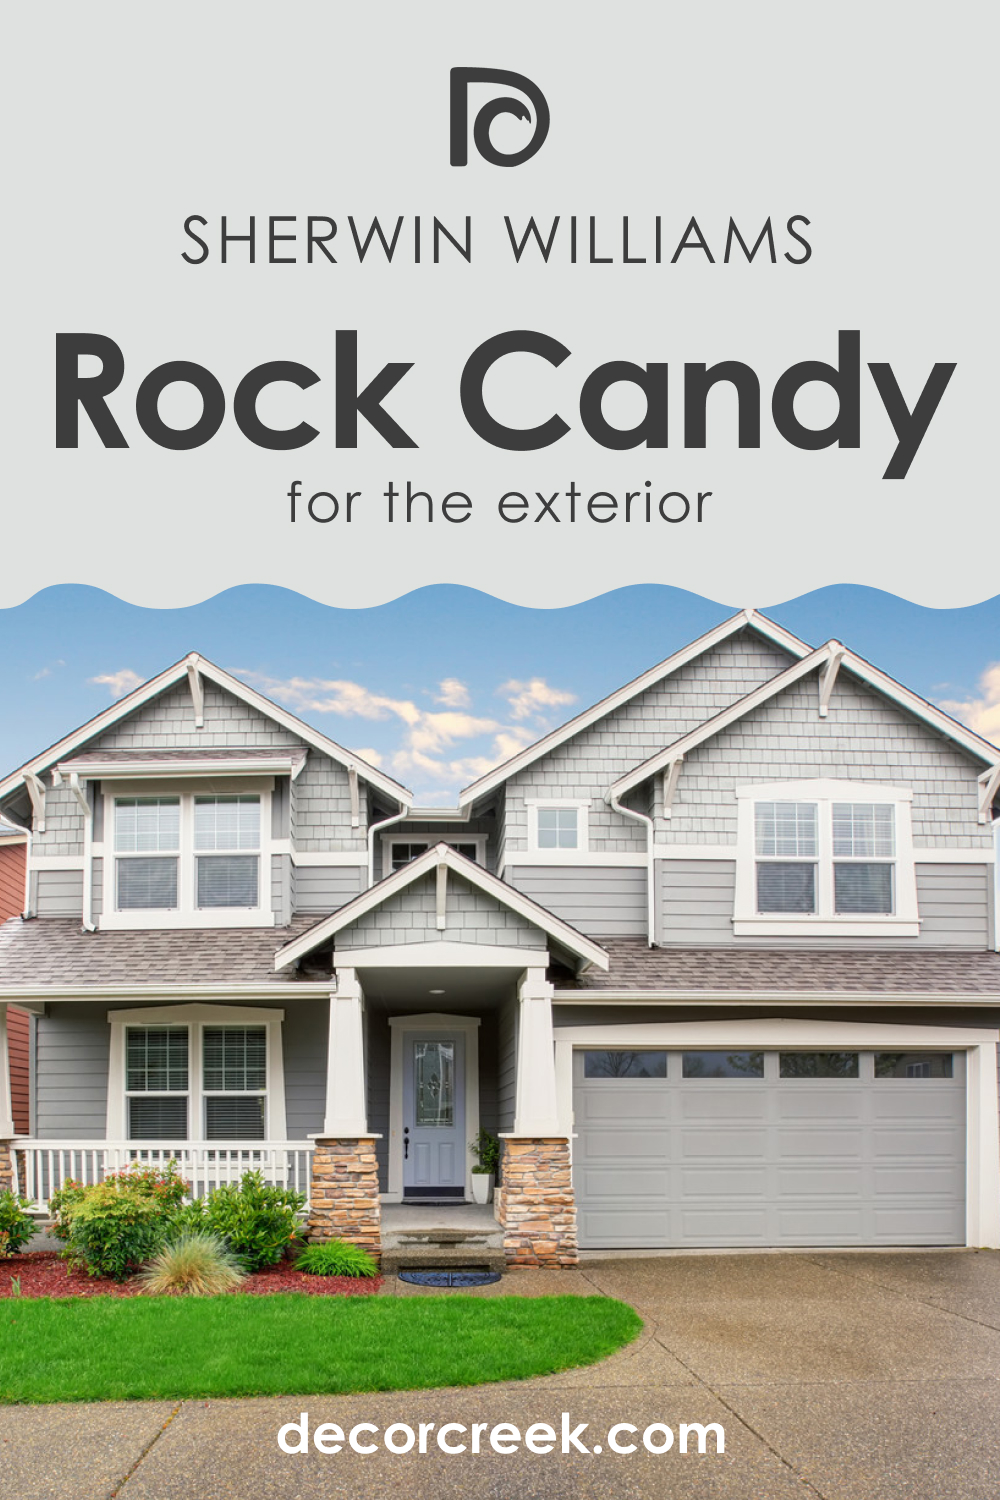 How to Use SW 6231 Rock Candy for an Exterior?